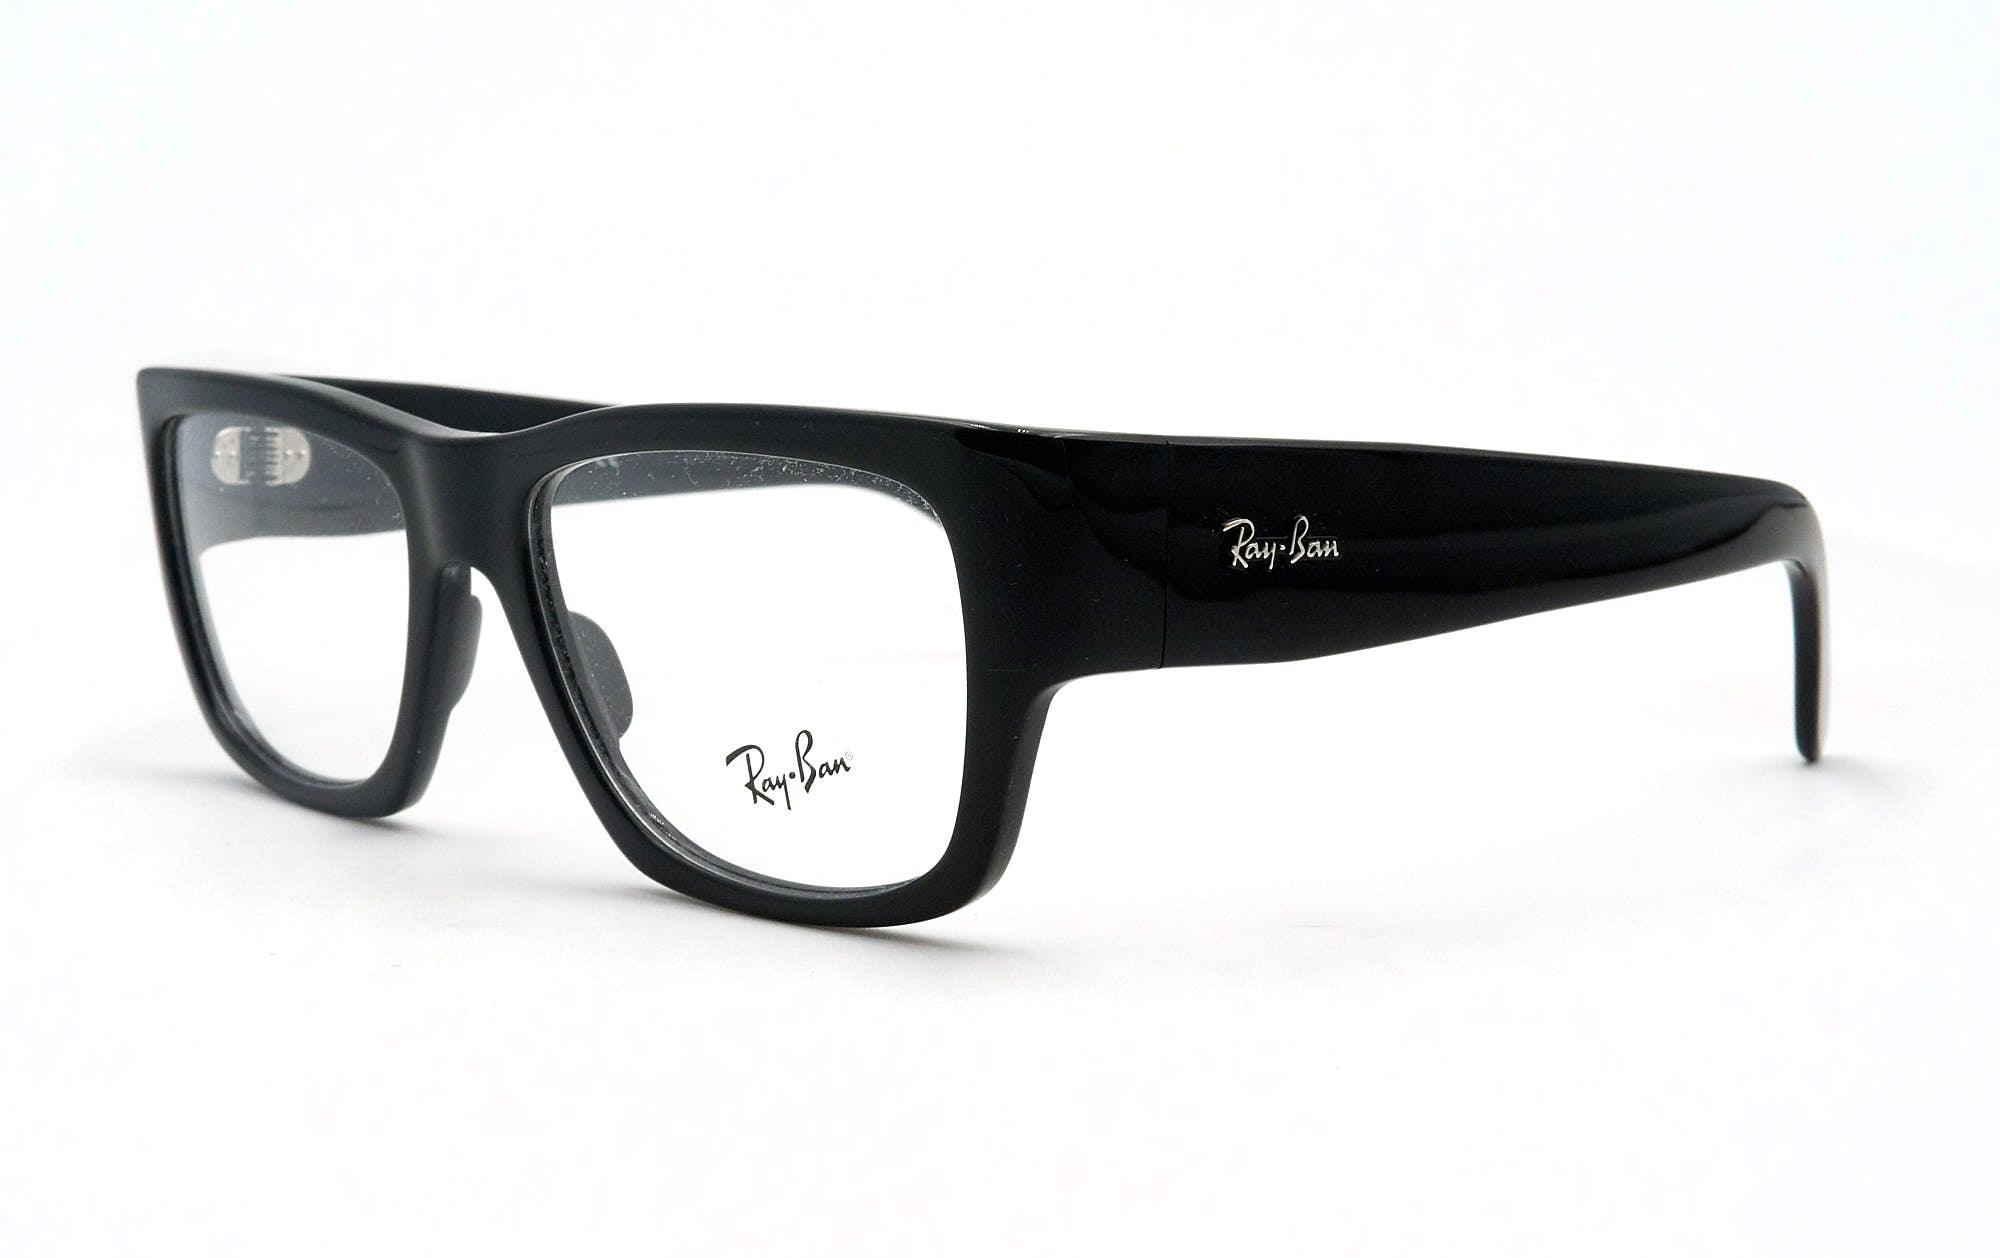 RAY-BAN 5487 2000 - Opticas Lookout